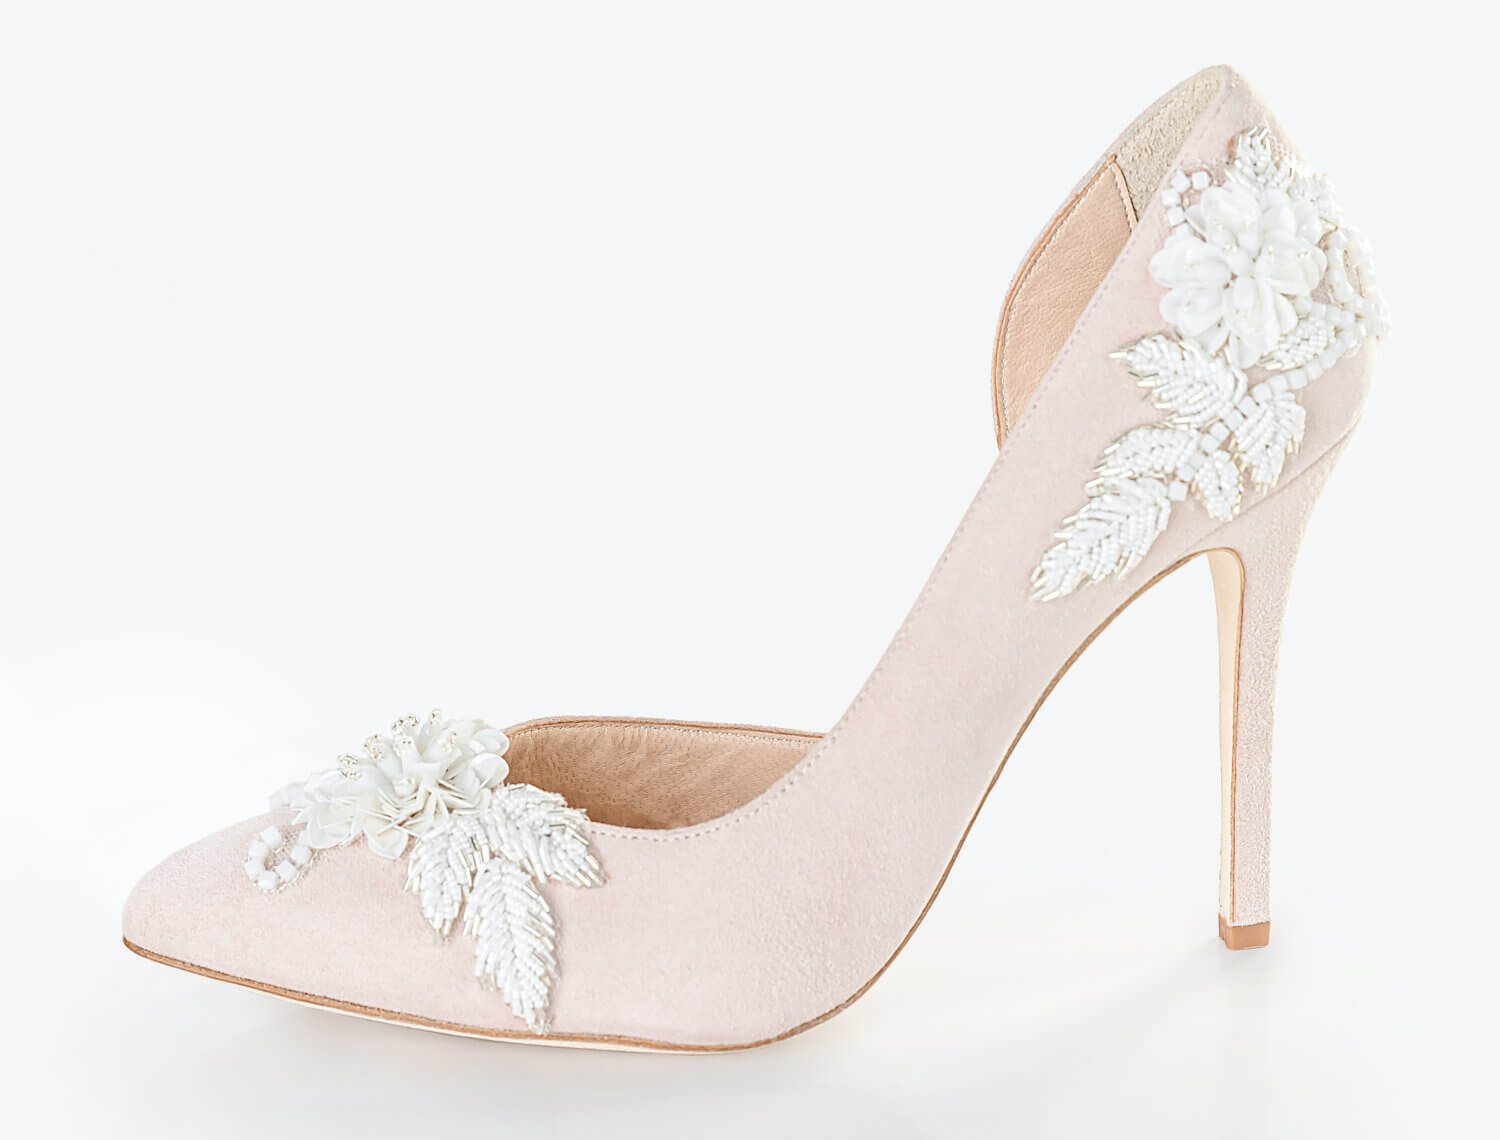 Marry Me embellished bridal heels. Wedding shoes handmade by Di Hassall.